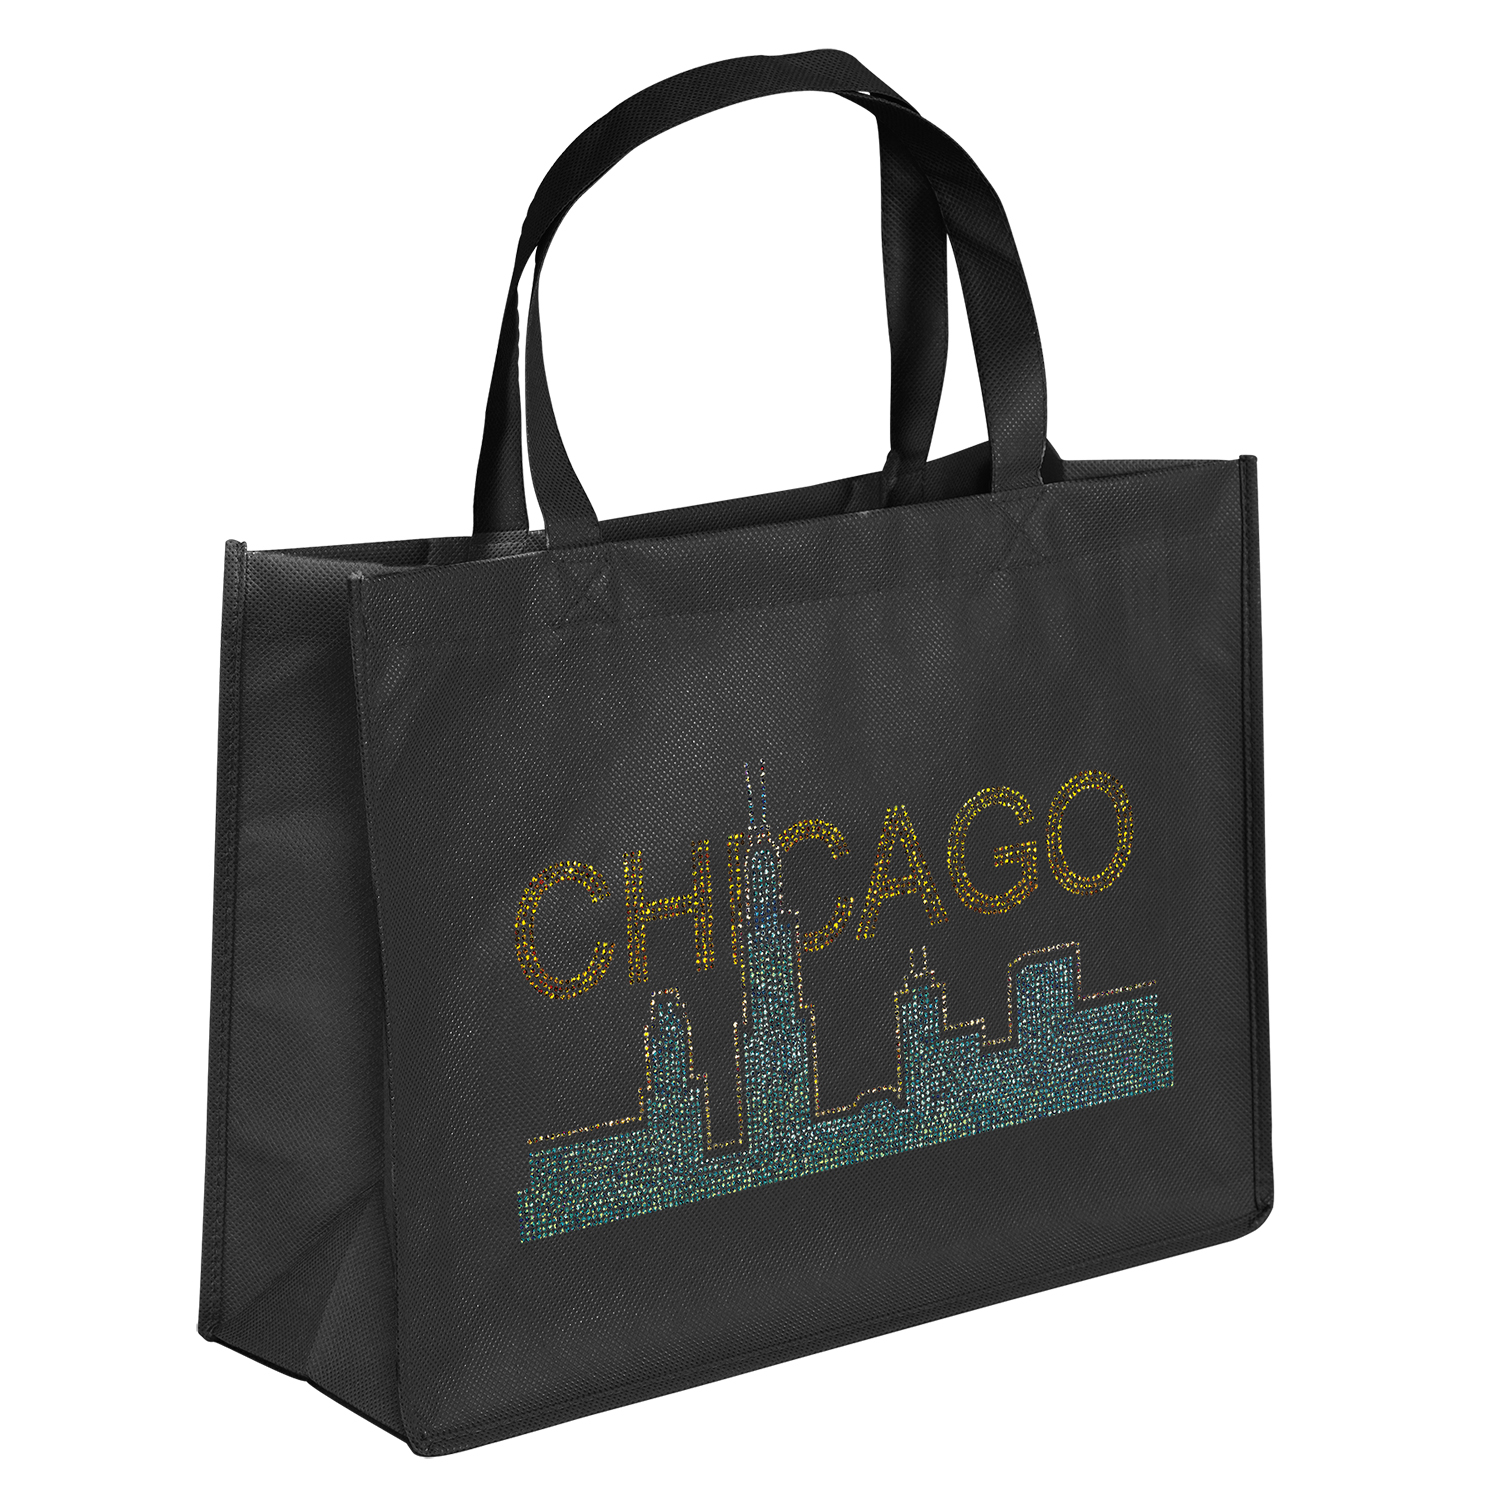 Bag Makers SPPS1612 - Custom Printed Eco-Friendly Promotional Non-Woven Grocery Tote Bag